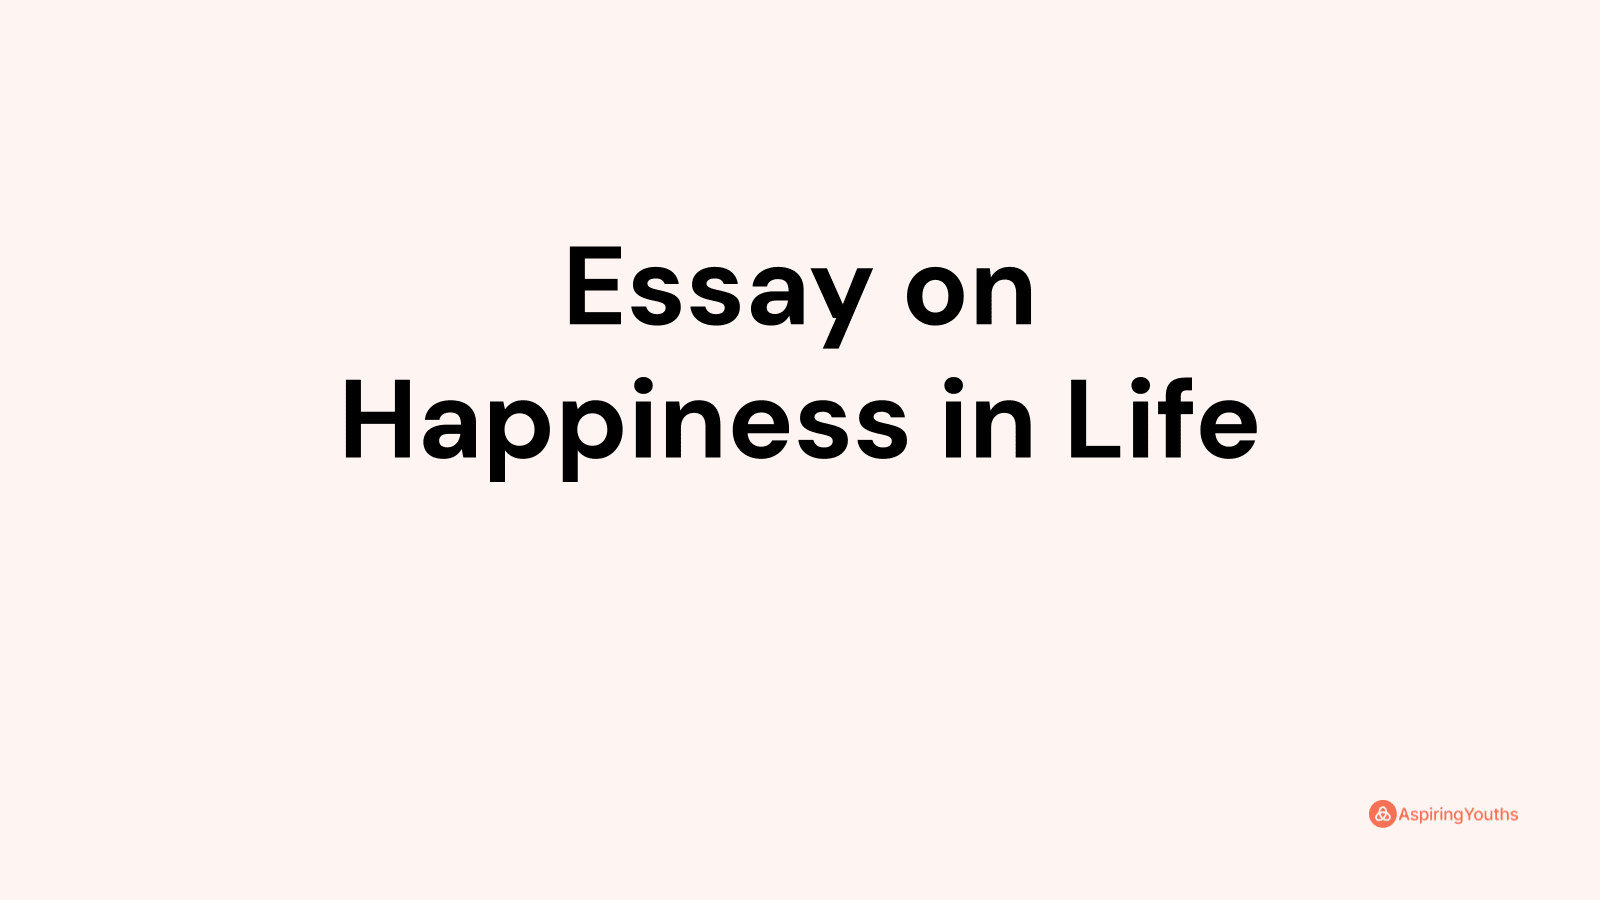 happiness is important in life essay